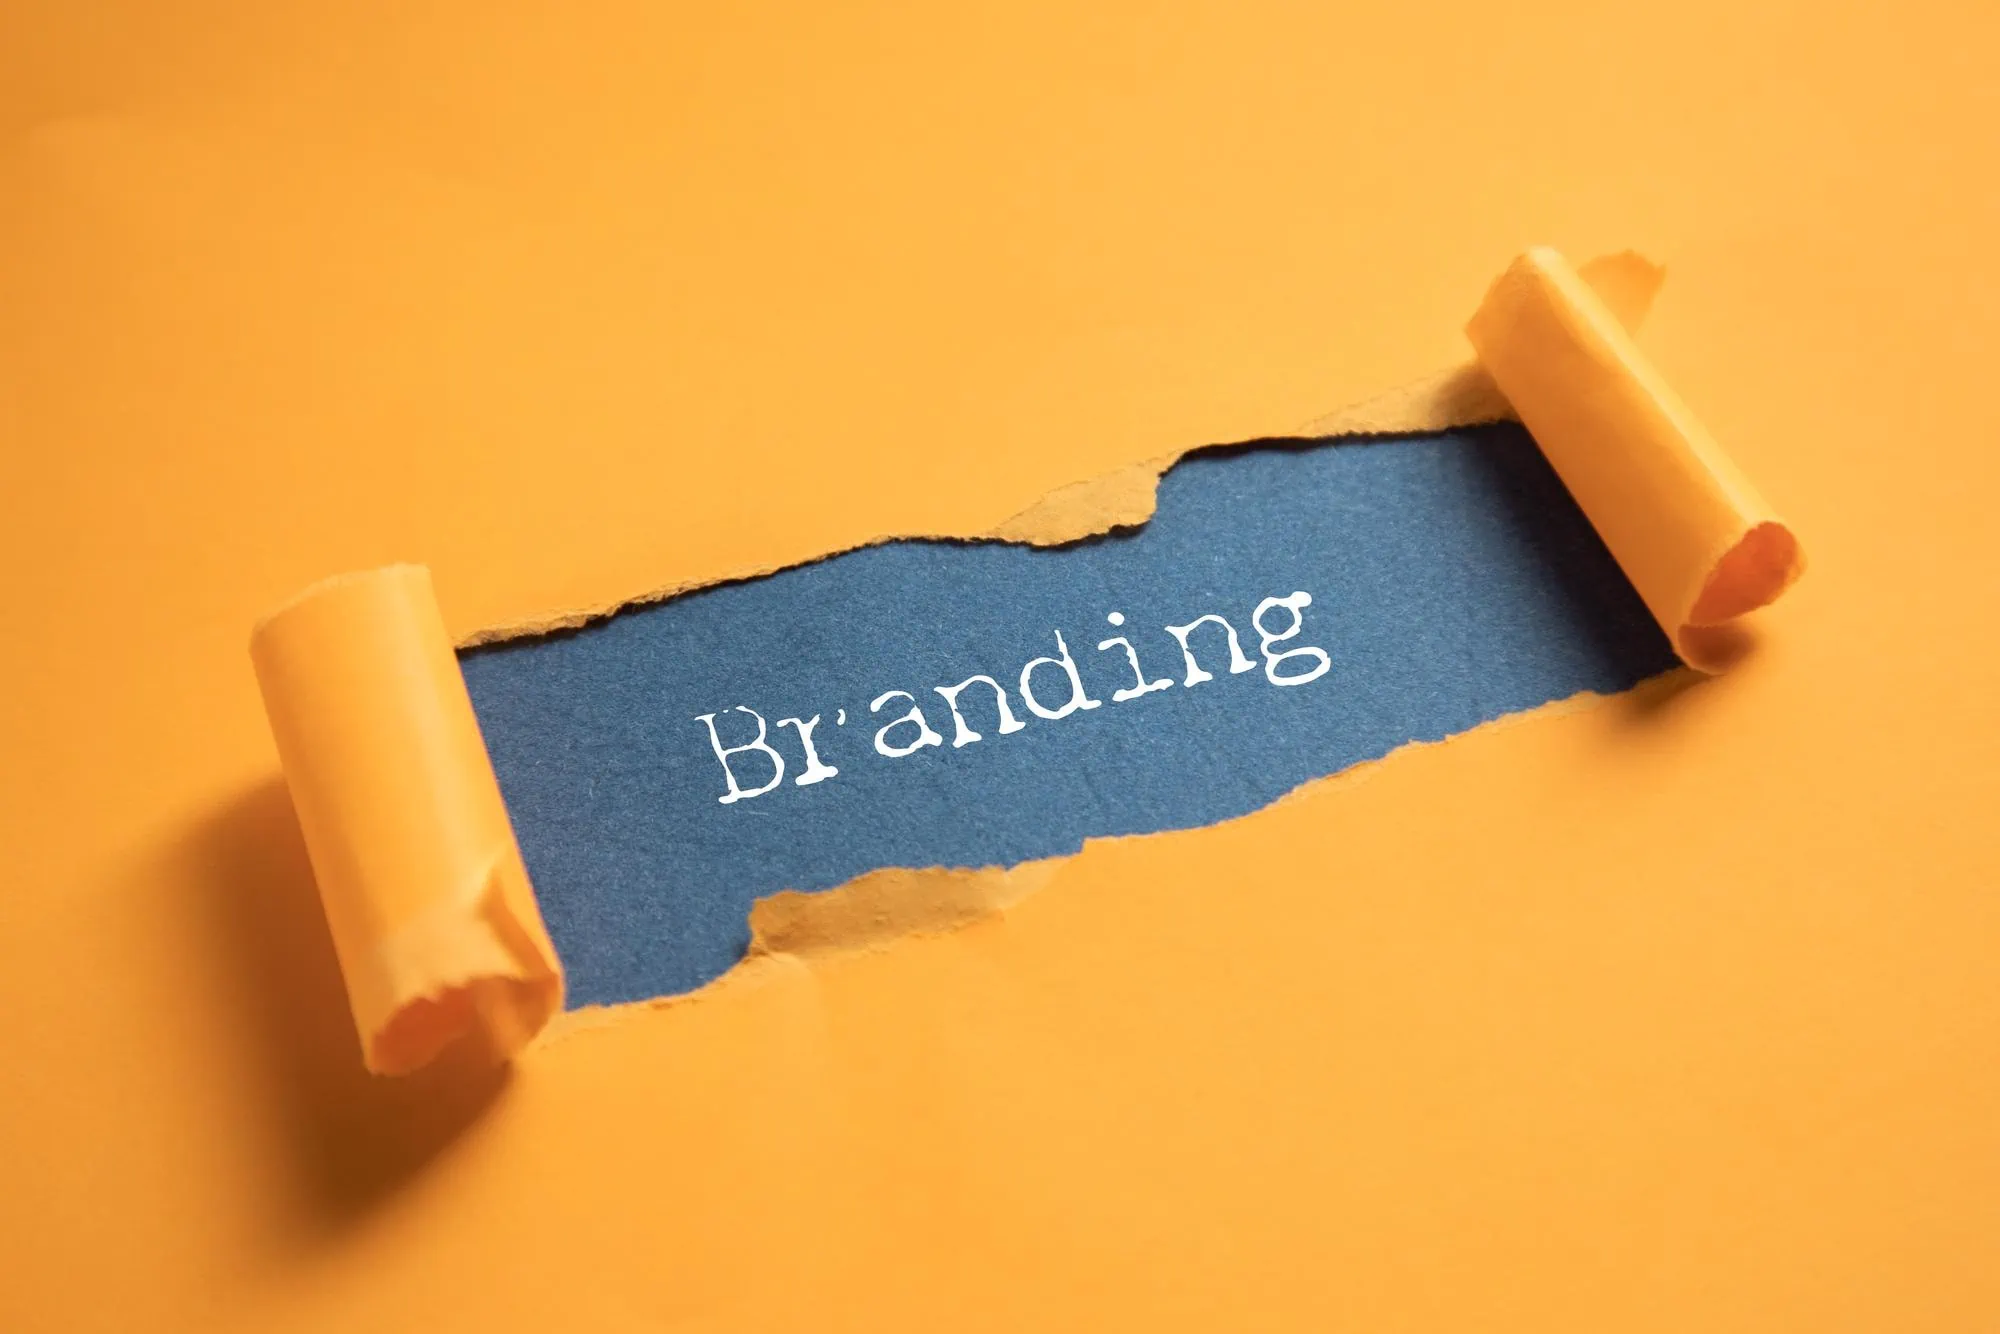 Branding: Everything You Need to Know